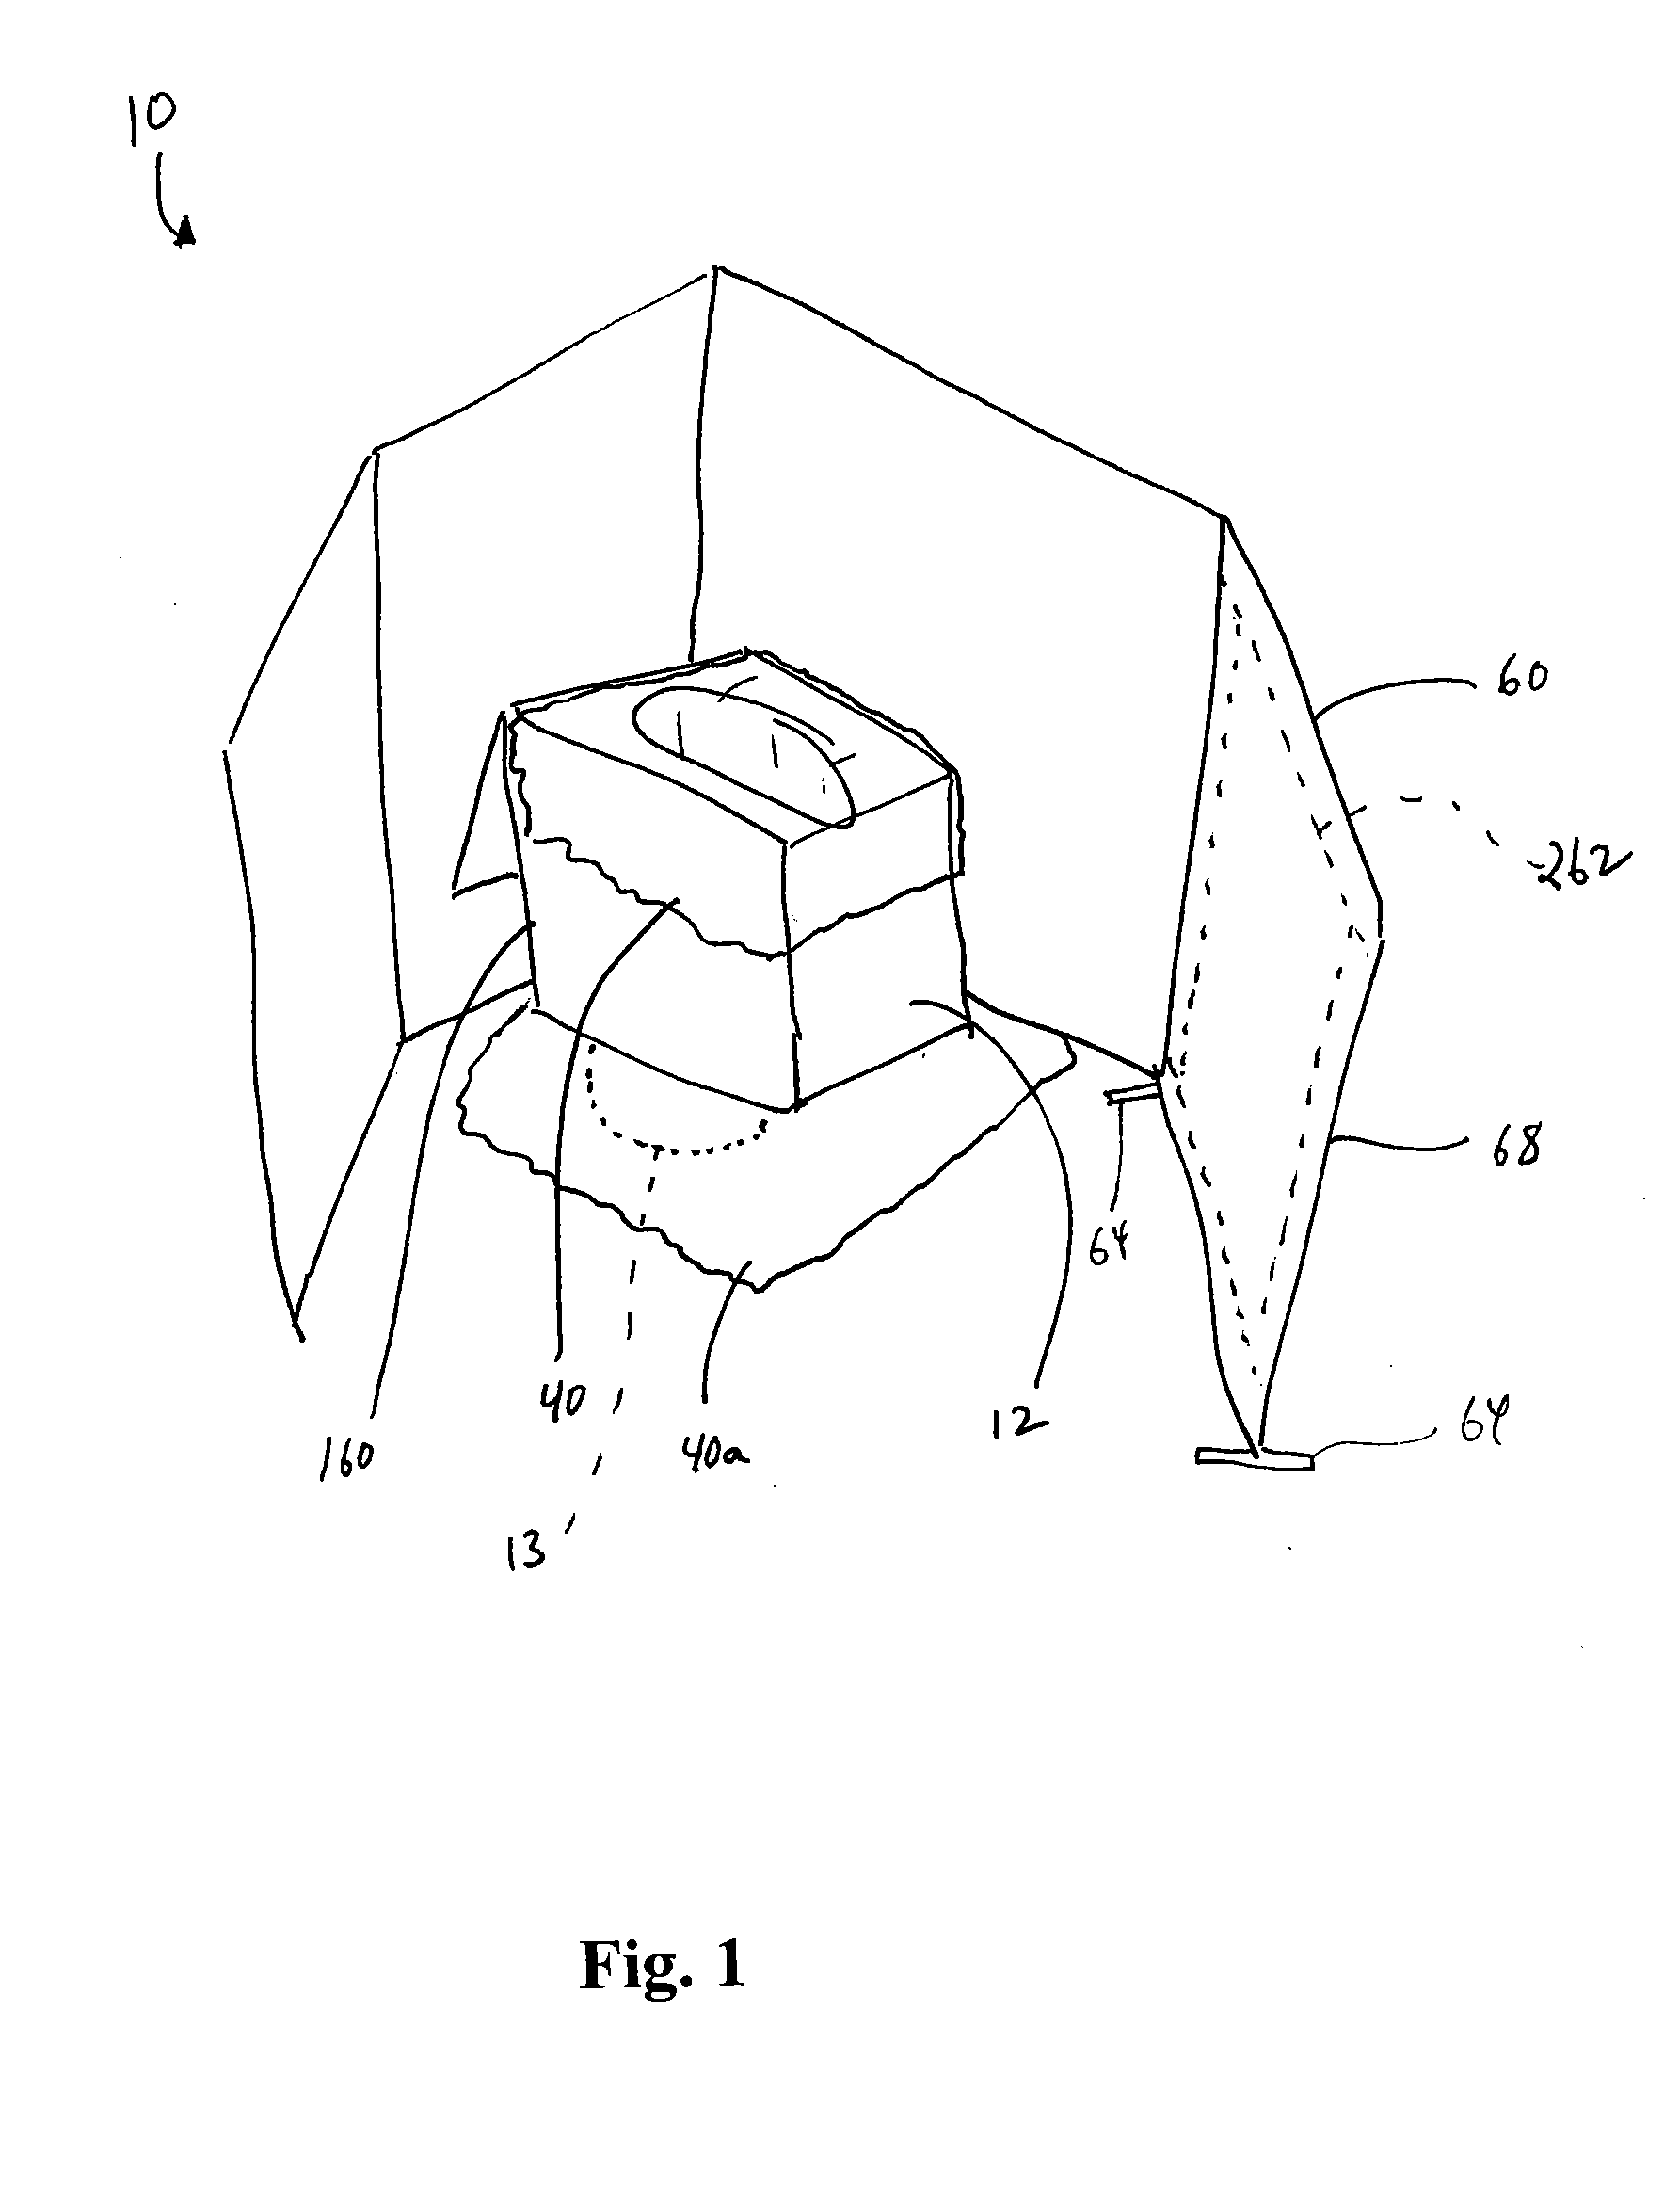 Systems and methods for providing a portable toilet system